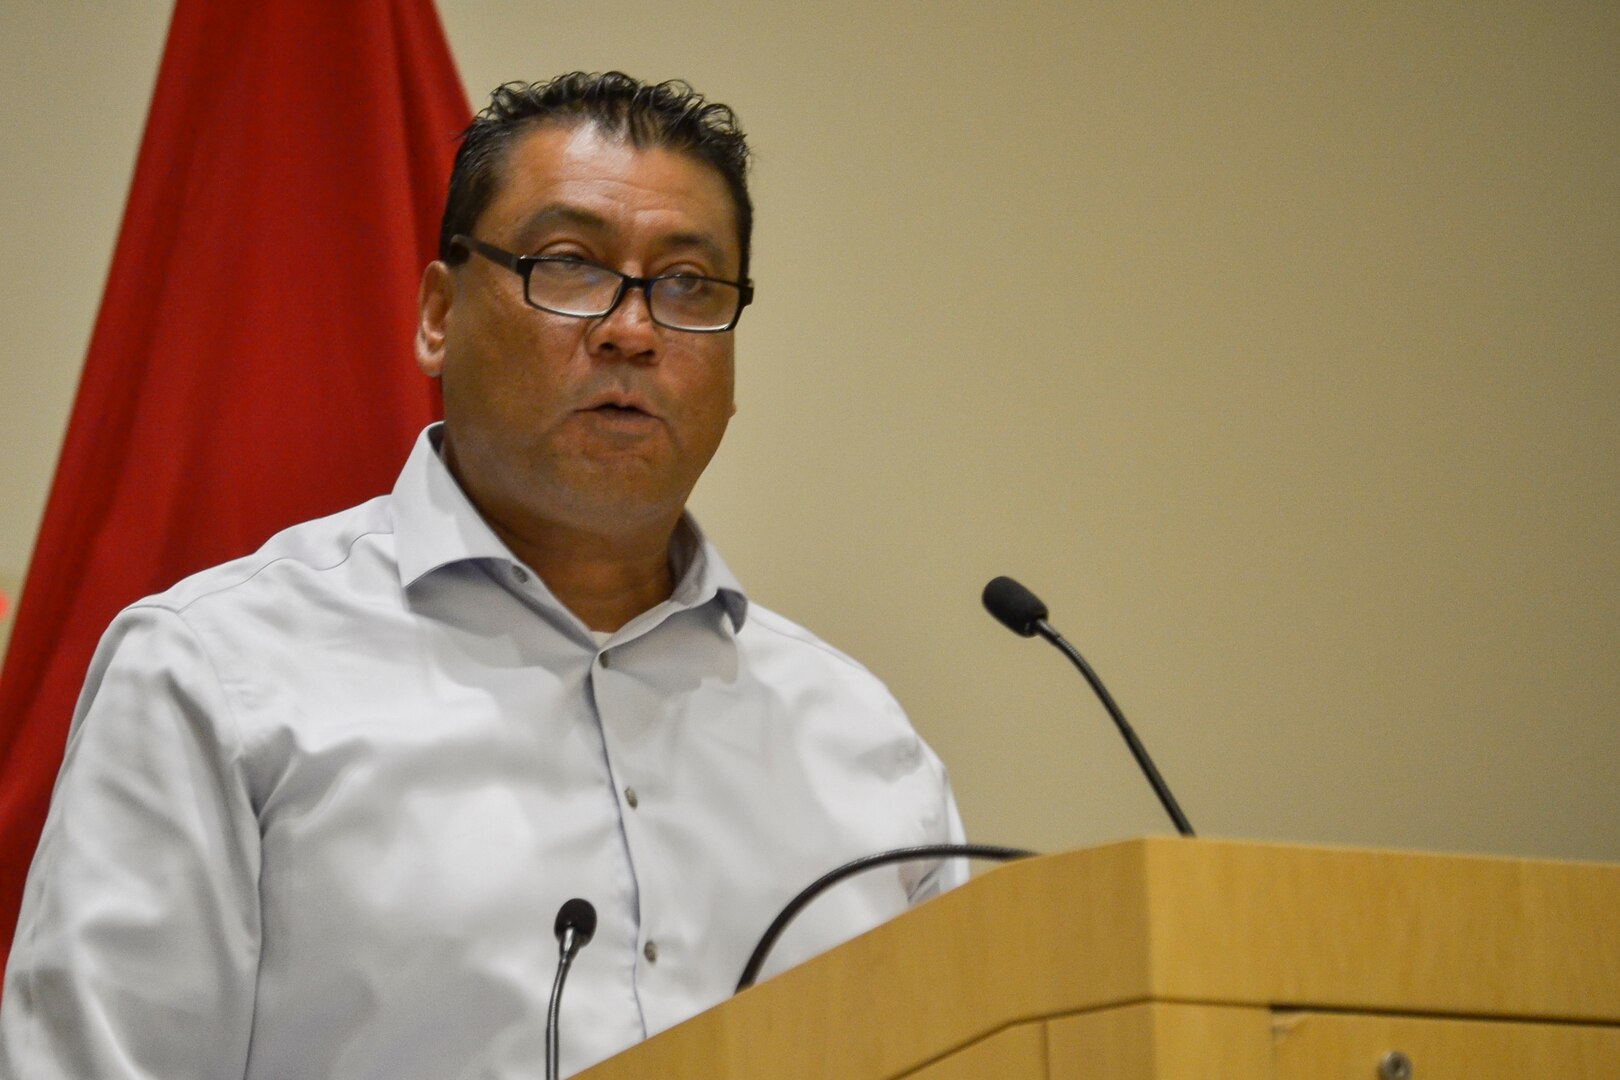 Manny Monterey, Filmmaker, Author and Community Activist speaks about growing up as a Hispanic American and his life’s work of documenting and assisting his community during the Hispanic Heritage Month celebration Sept. 25, 2019 at DLA Troop Support in Philadelphia.